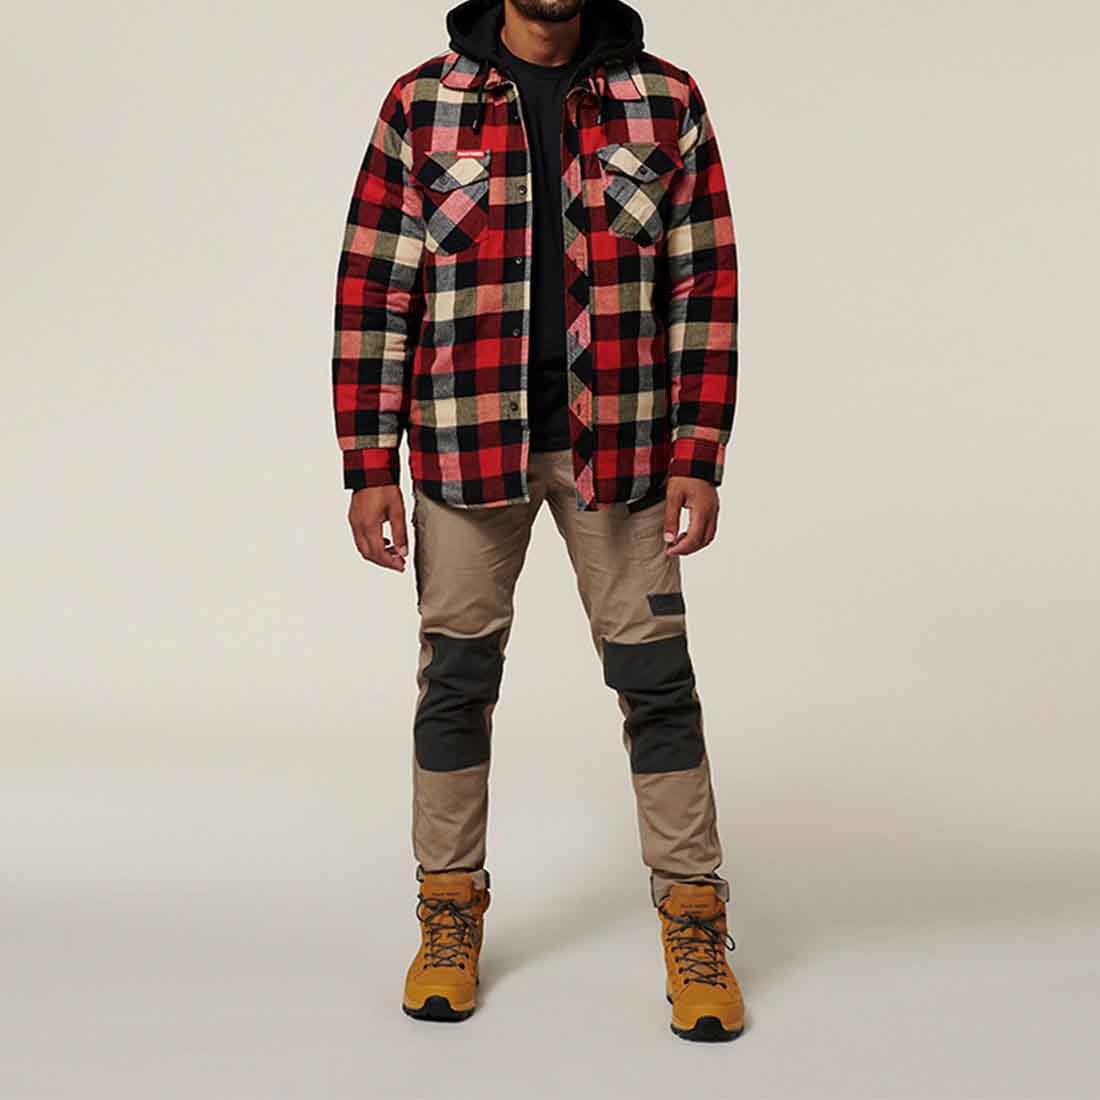 Hard Yakka Red Quilted Shacket | Men's Red Checked Shirts & Jackets